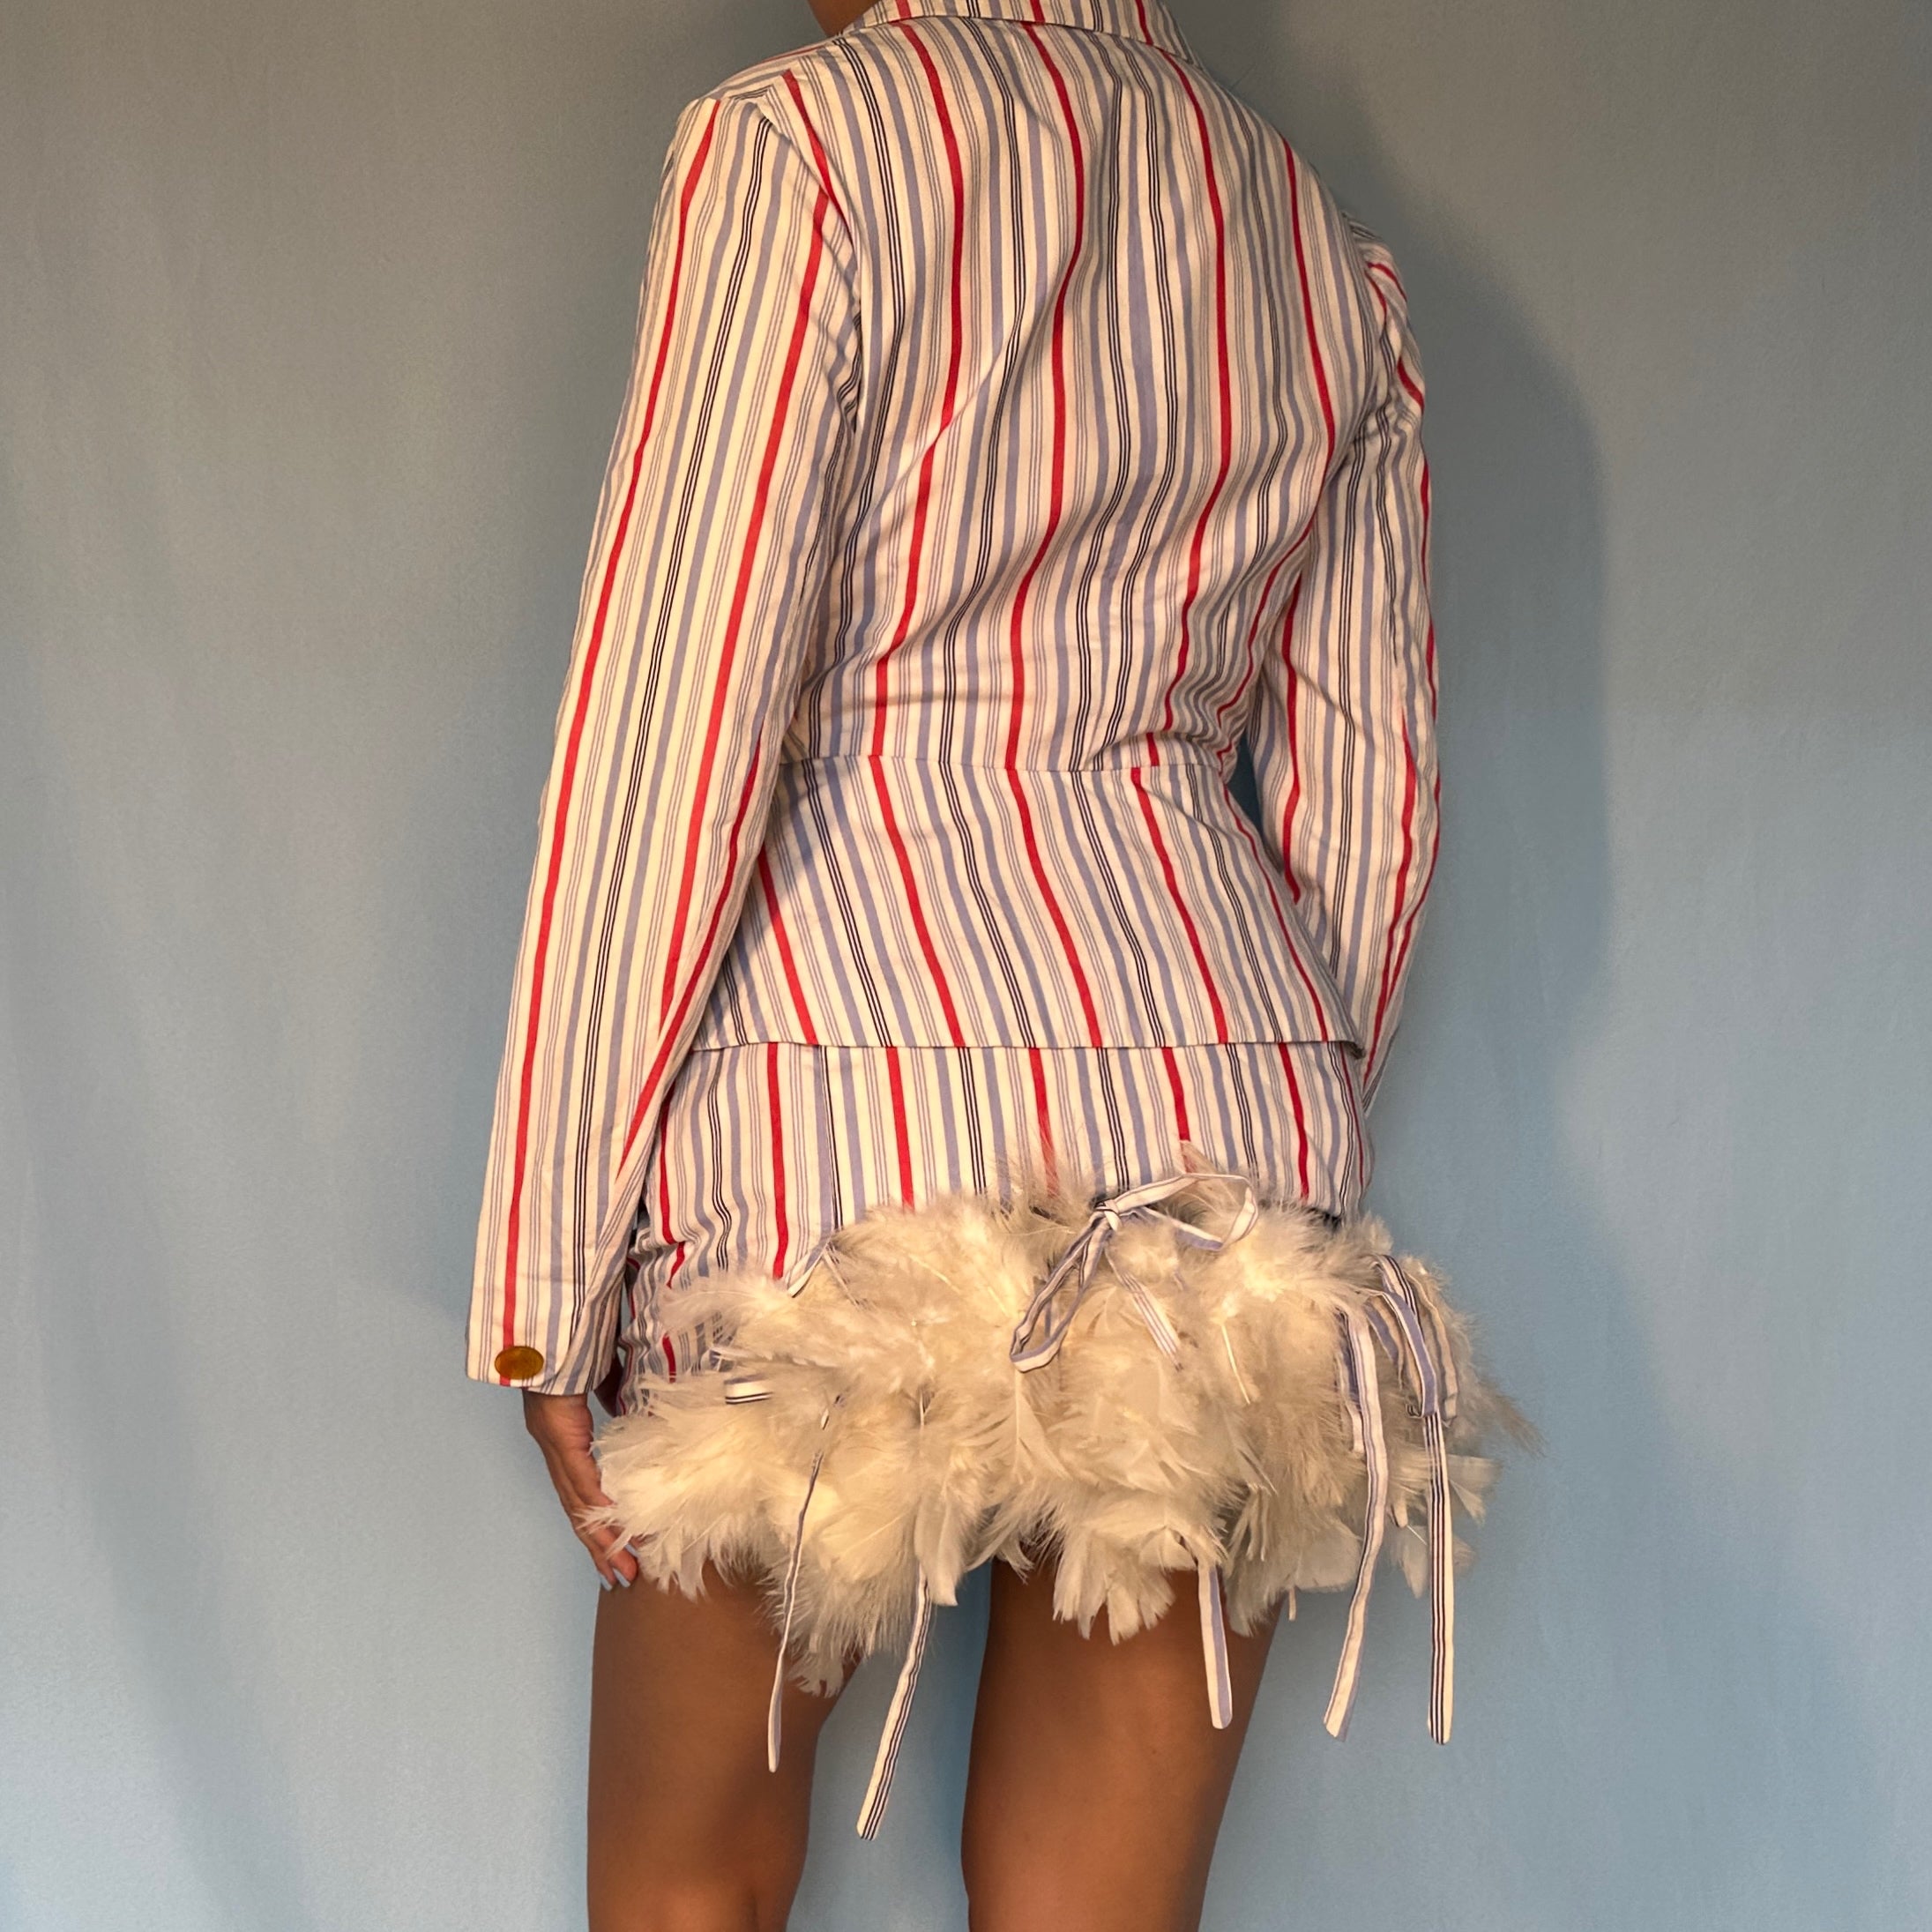 Vivienne Westwood Spring 1994 “Cafe Society” Checked Bustle Skirt & Wa –  Studded Petals Vintage